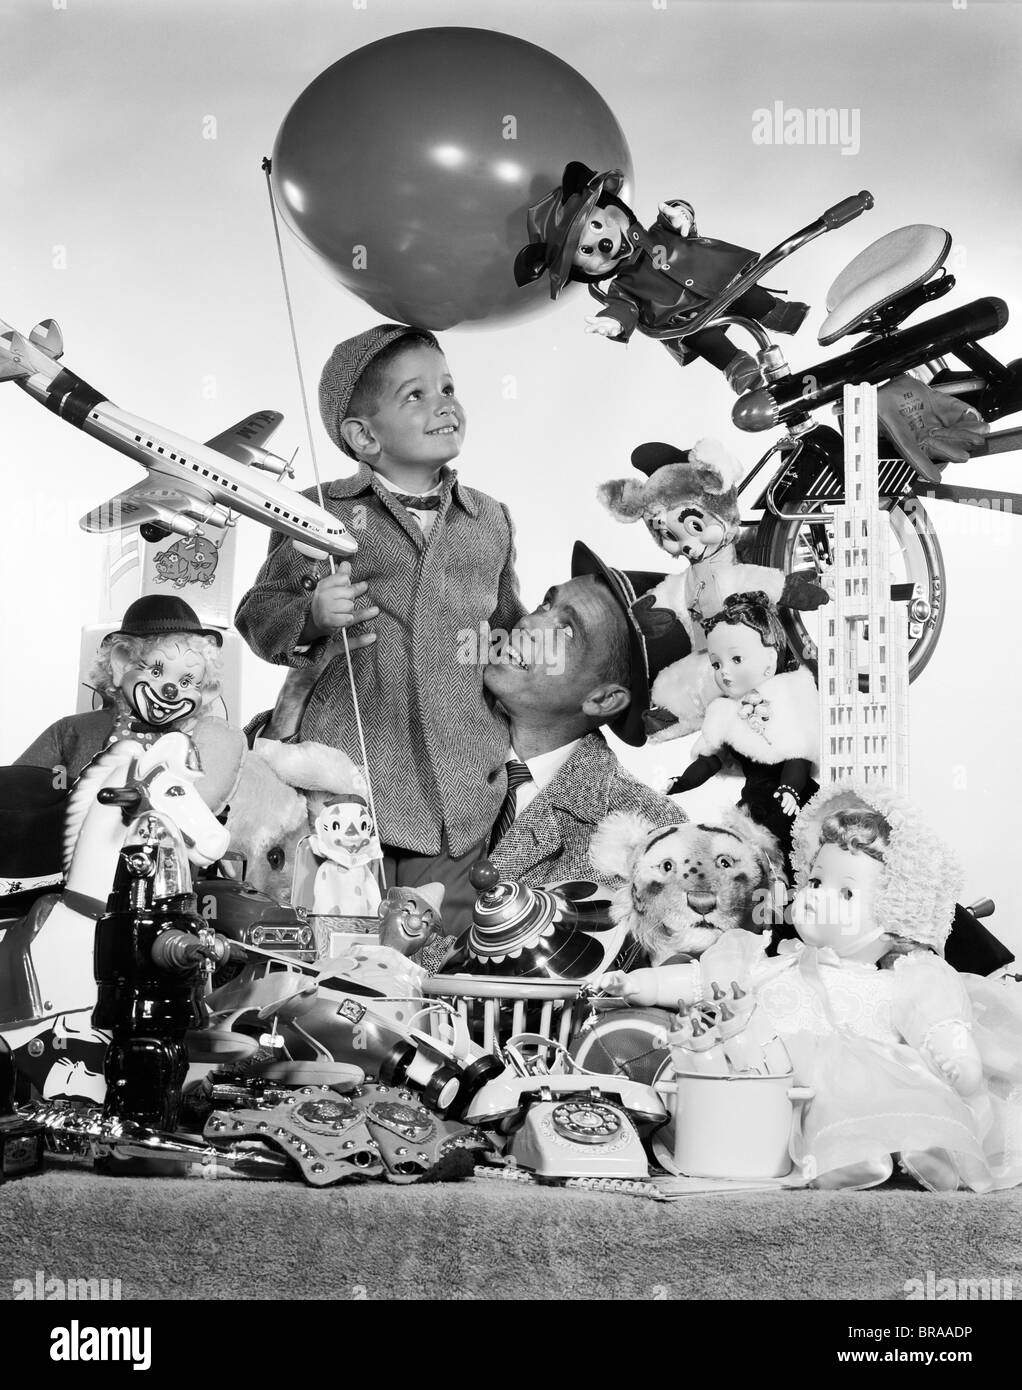 1950s FATHER WITH SON HOLDING BALLOON SURROUNDED BY TOYS & STUFFED ANIMALS Stock Photo